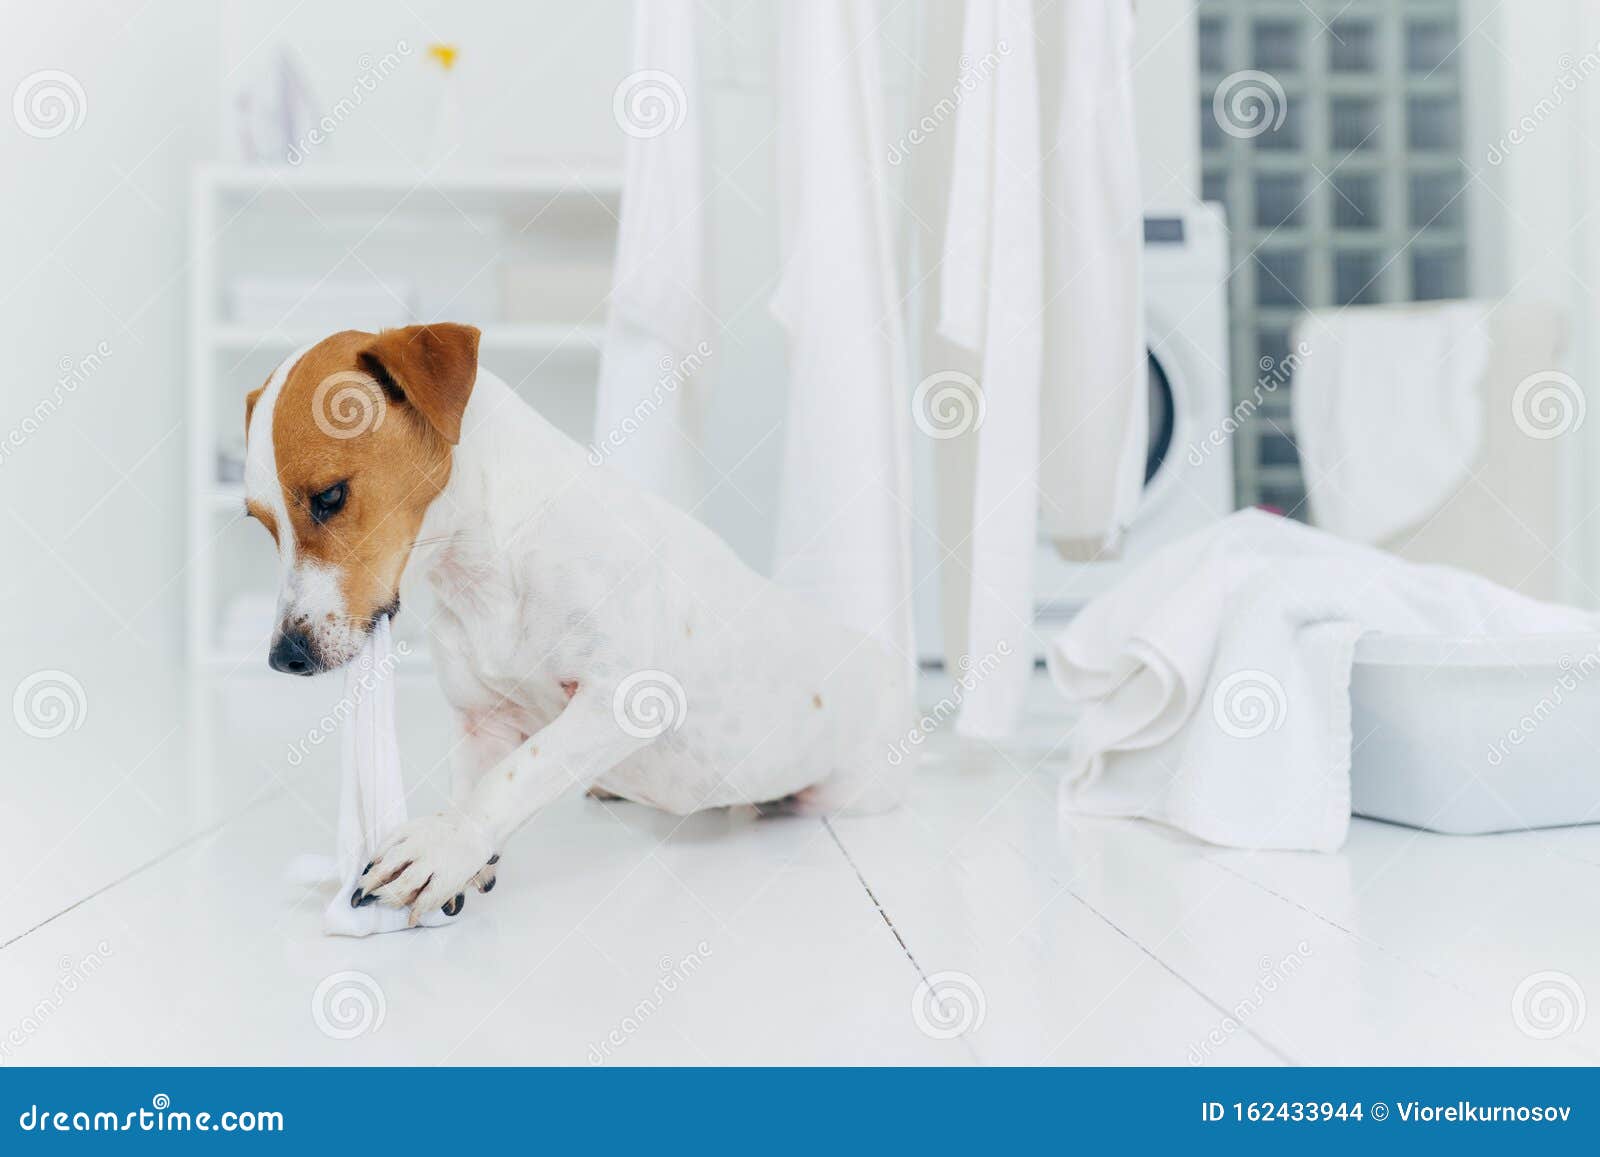 horizontal shot of jack rusell terrier bites white linen while host is away, has much work in laundry room, going to be punished,